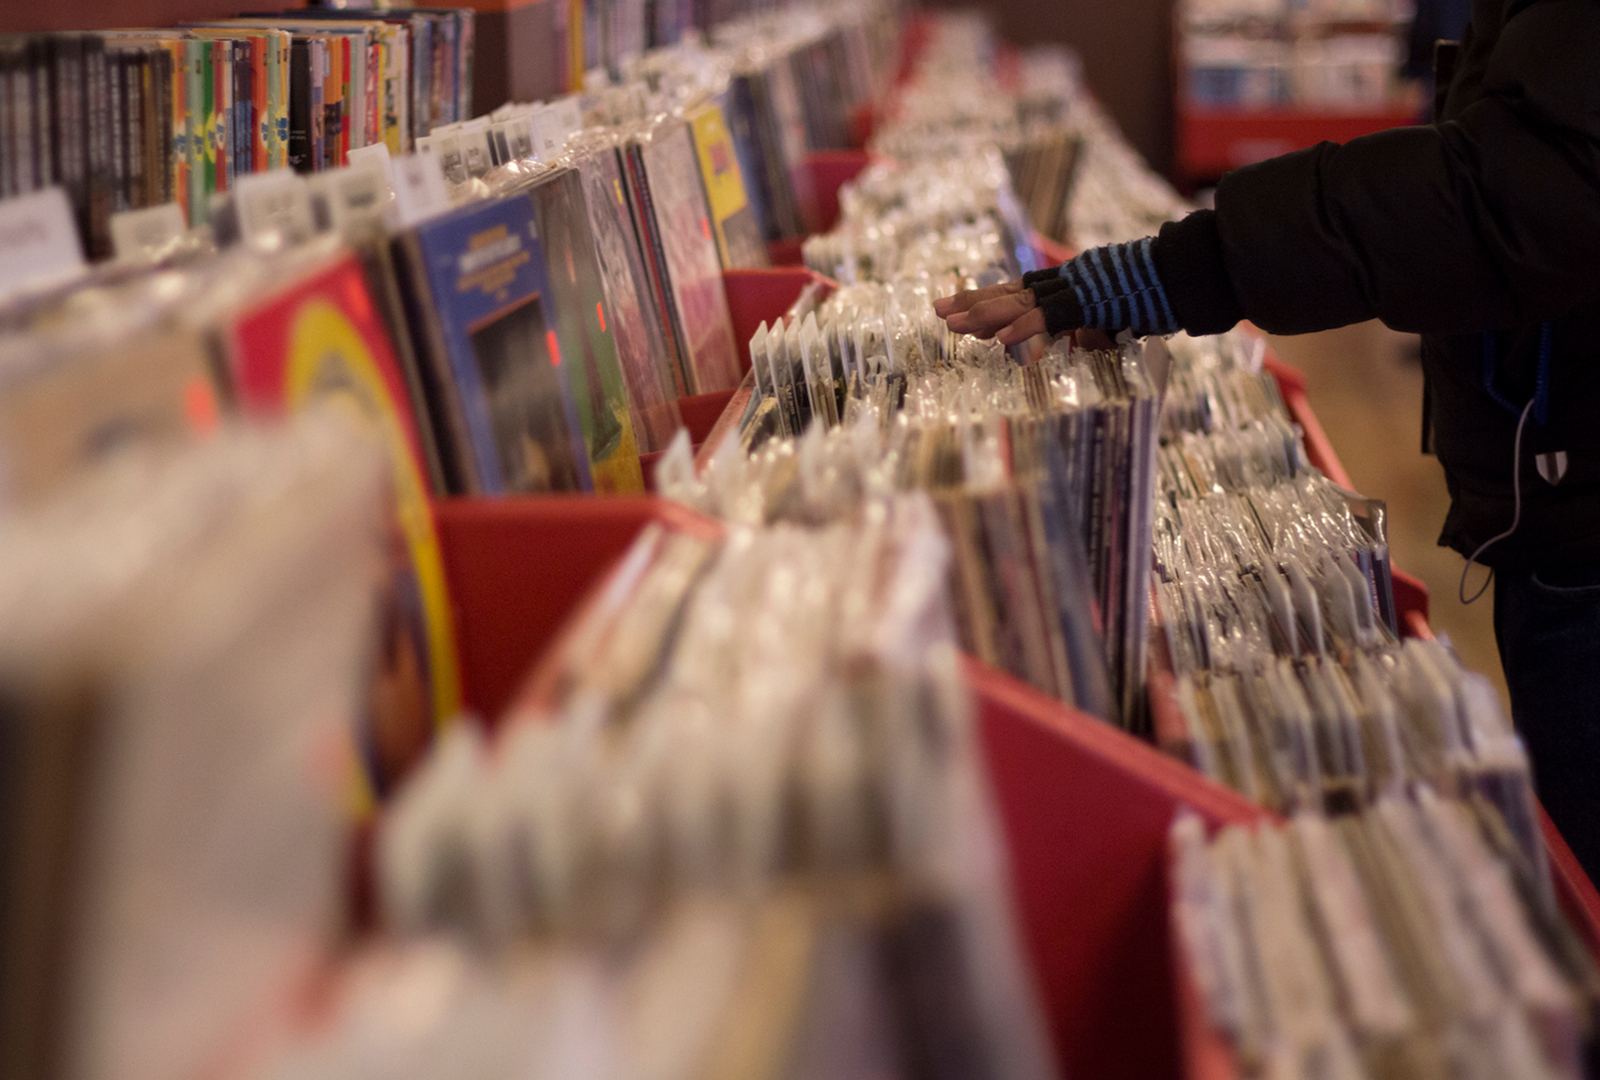 US vinyl sales were up 22% in the first half of the year